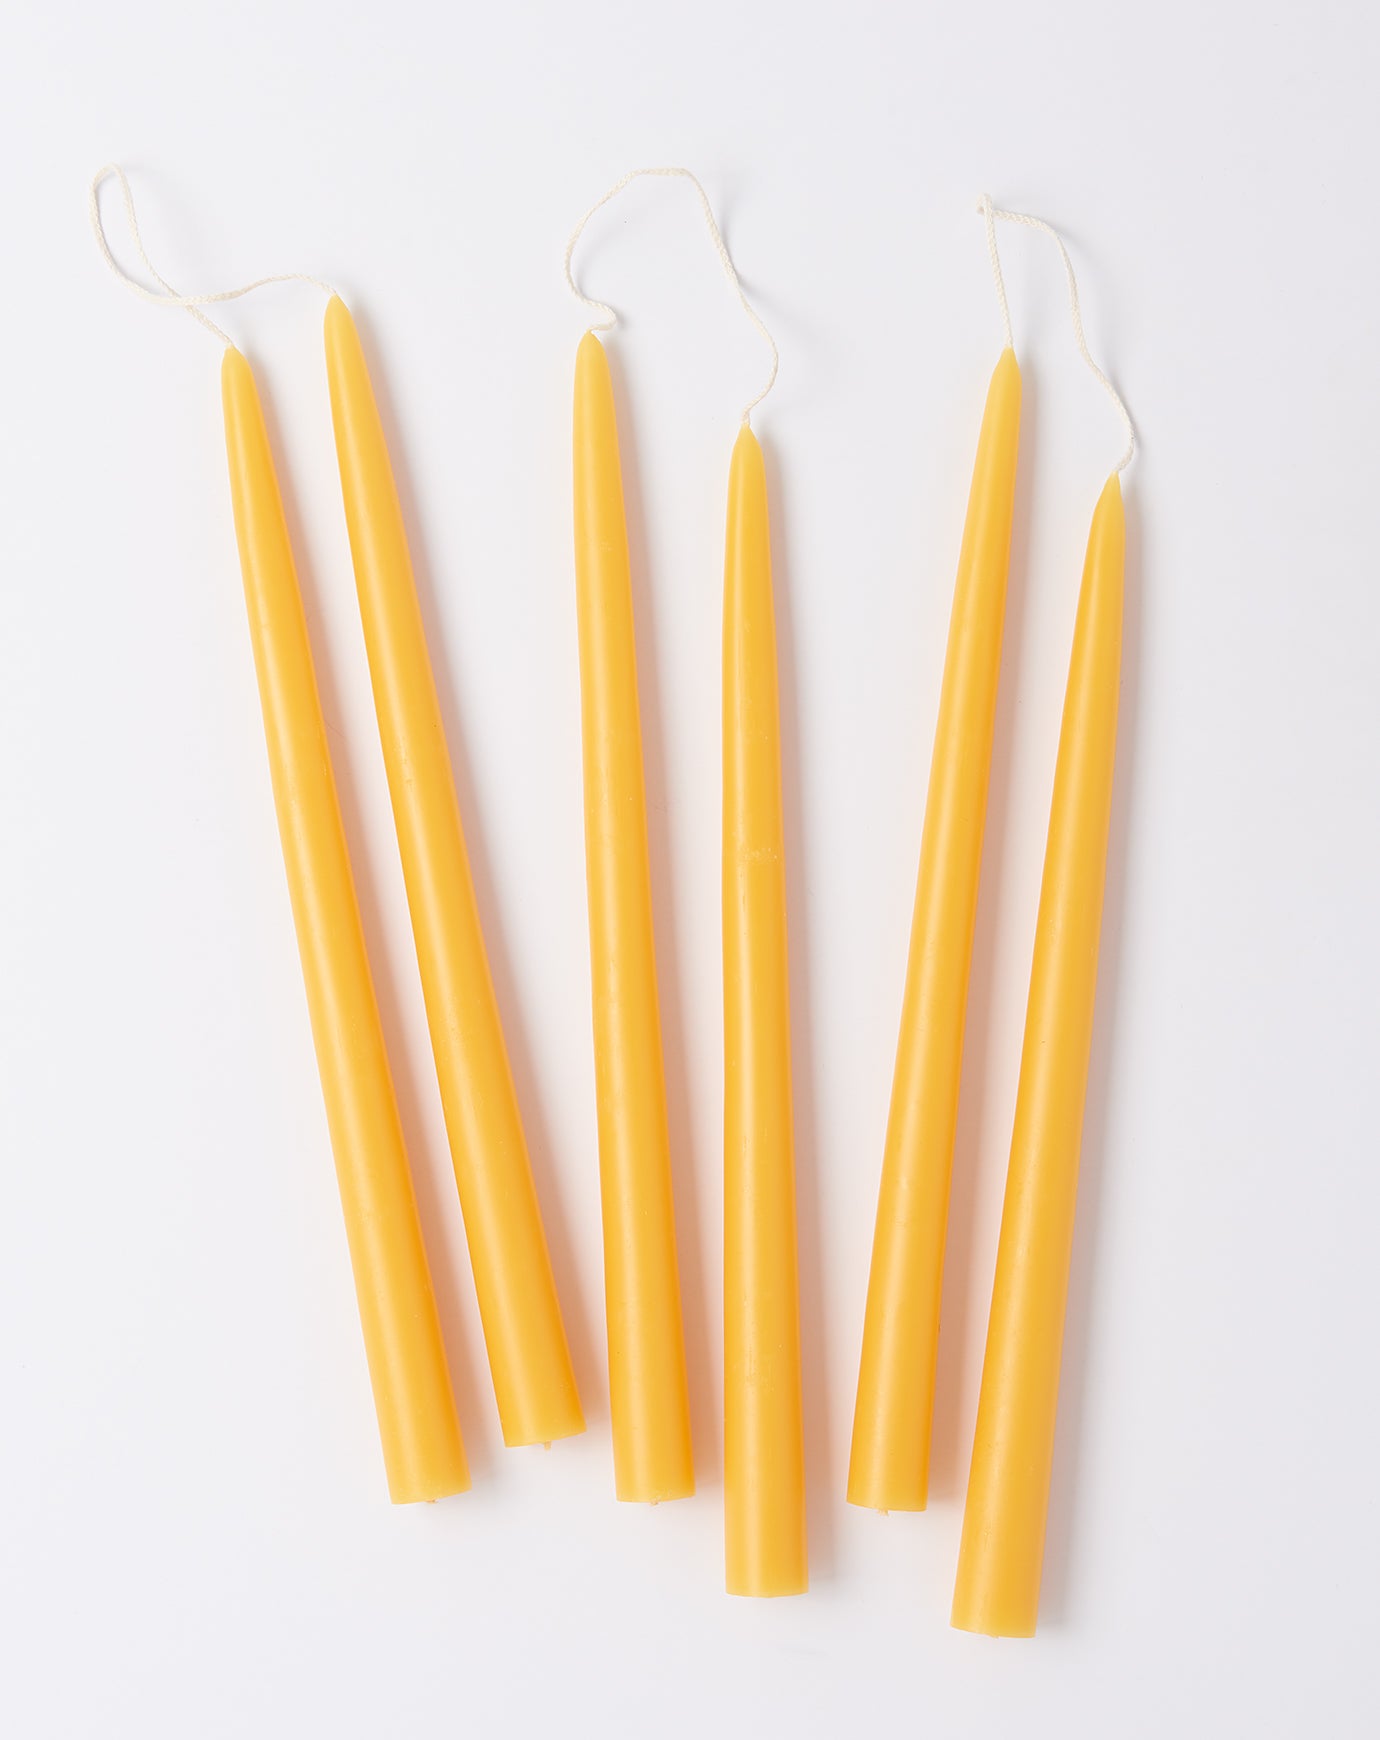 The Floral Society Pair of 12" Taper Candles in Saffron